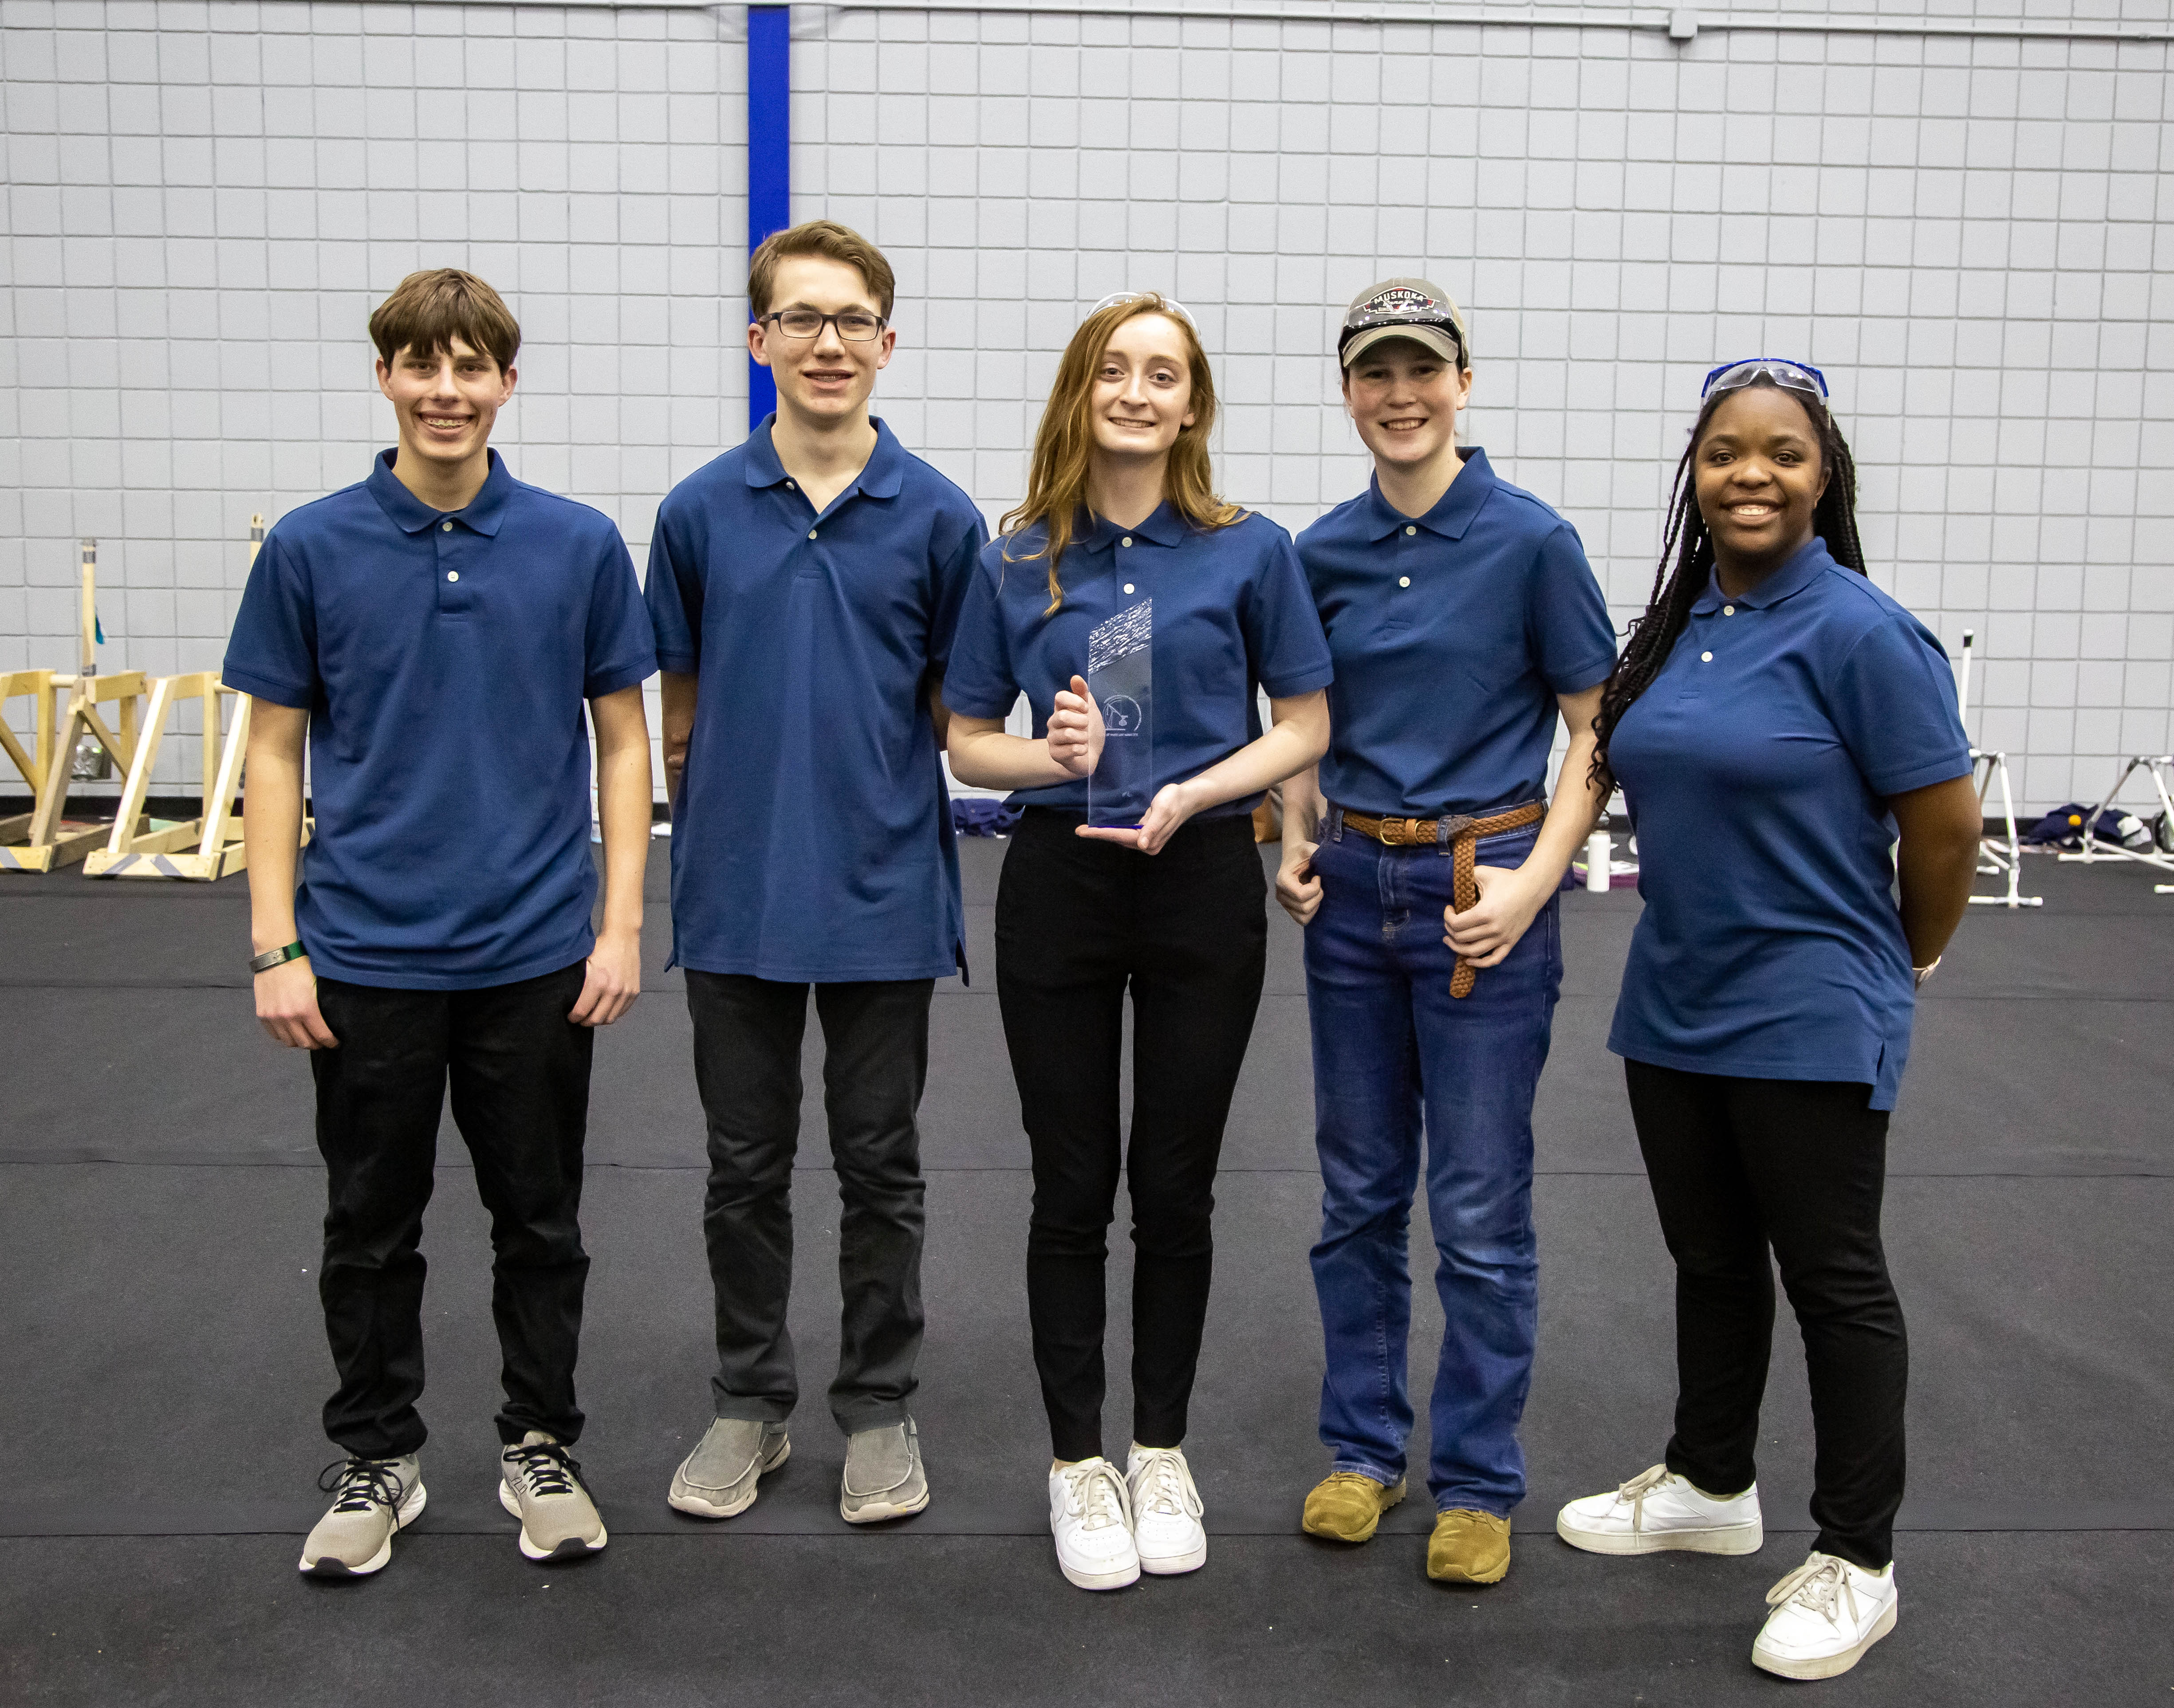 M3, a team of area homeschool students, took first place in the journaling contest and second place in trebuchet. Pictured, from left to right, are Jacob Schaper, Blake Schaper, Caroline Bleymaier, Abi Zimmerman and Sophia Bleymaier